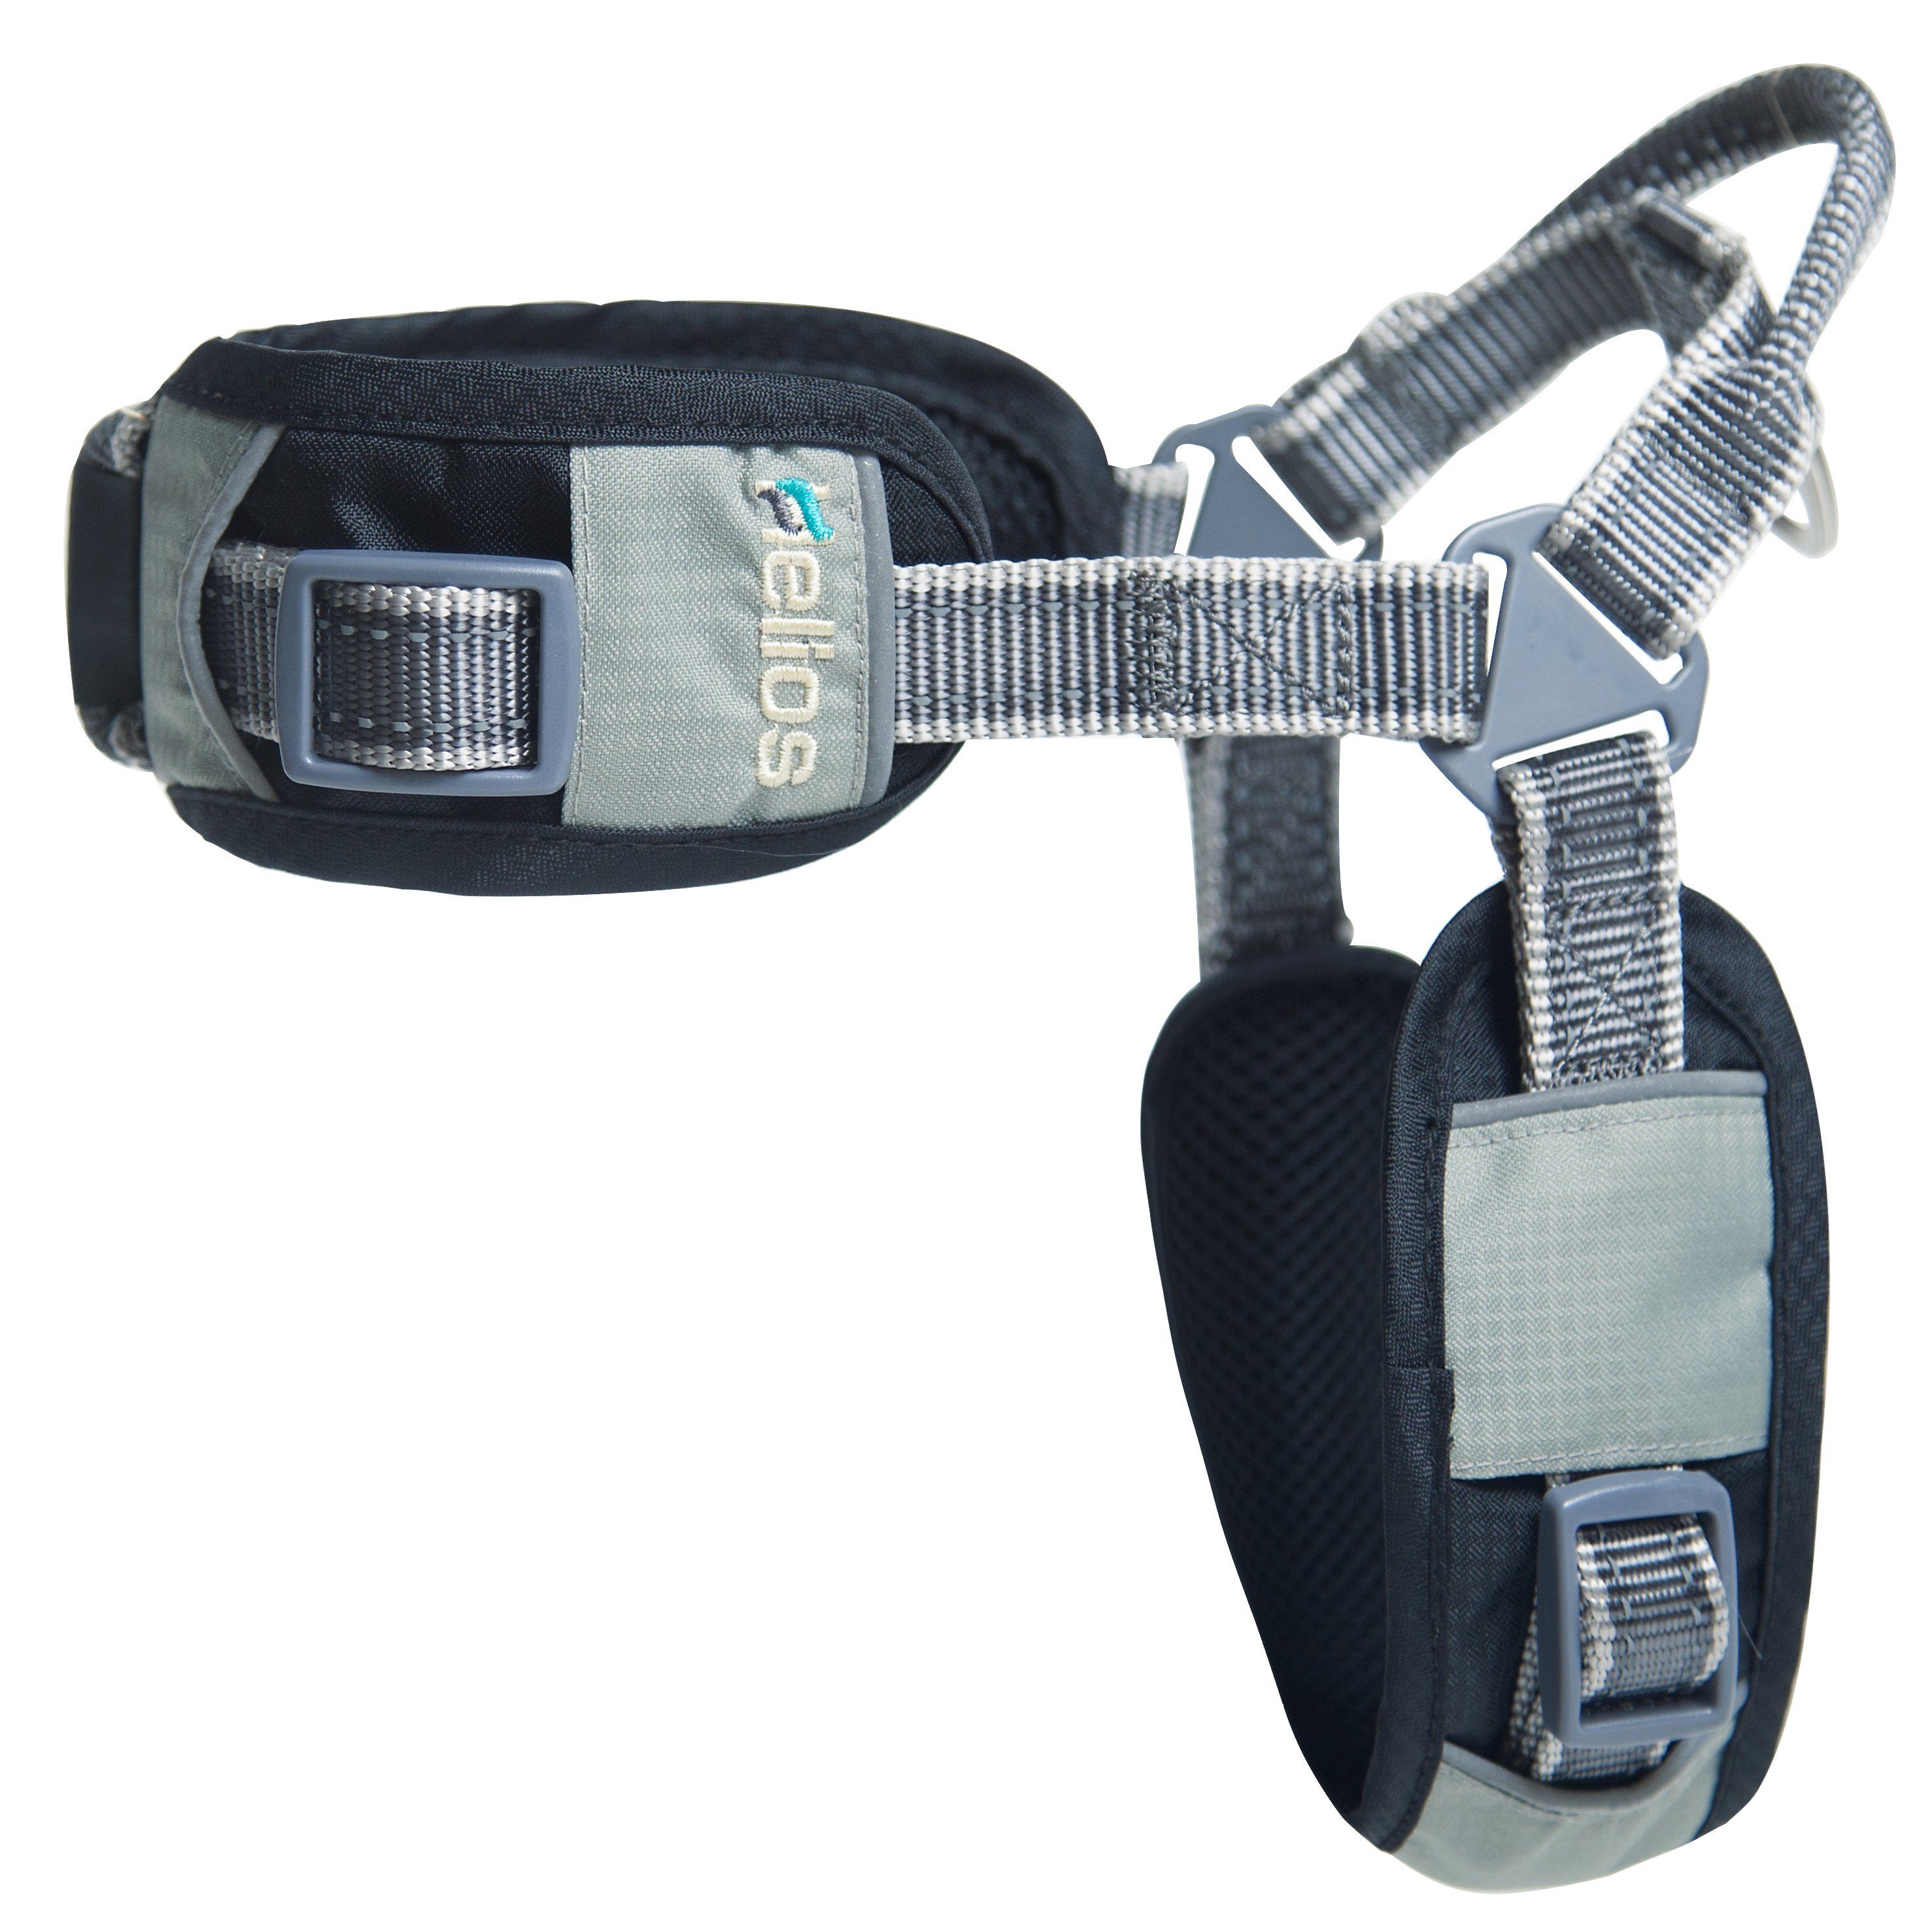 Dog Helios 'Geo-turf' Performance Adjustible and Reflective Dog Harness and Leash Small Black